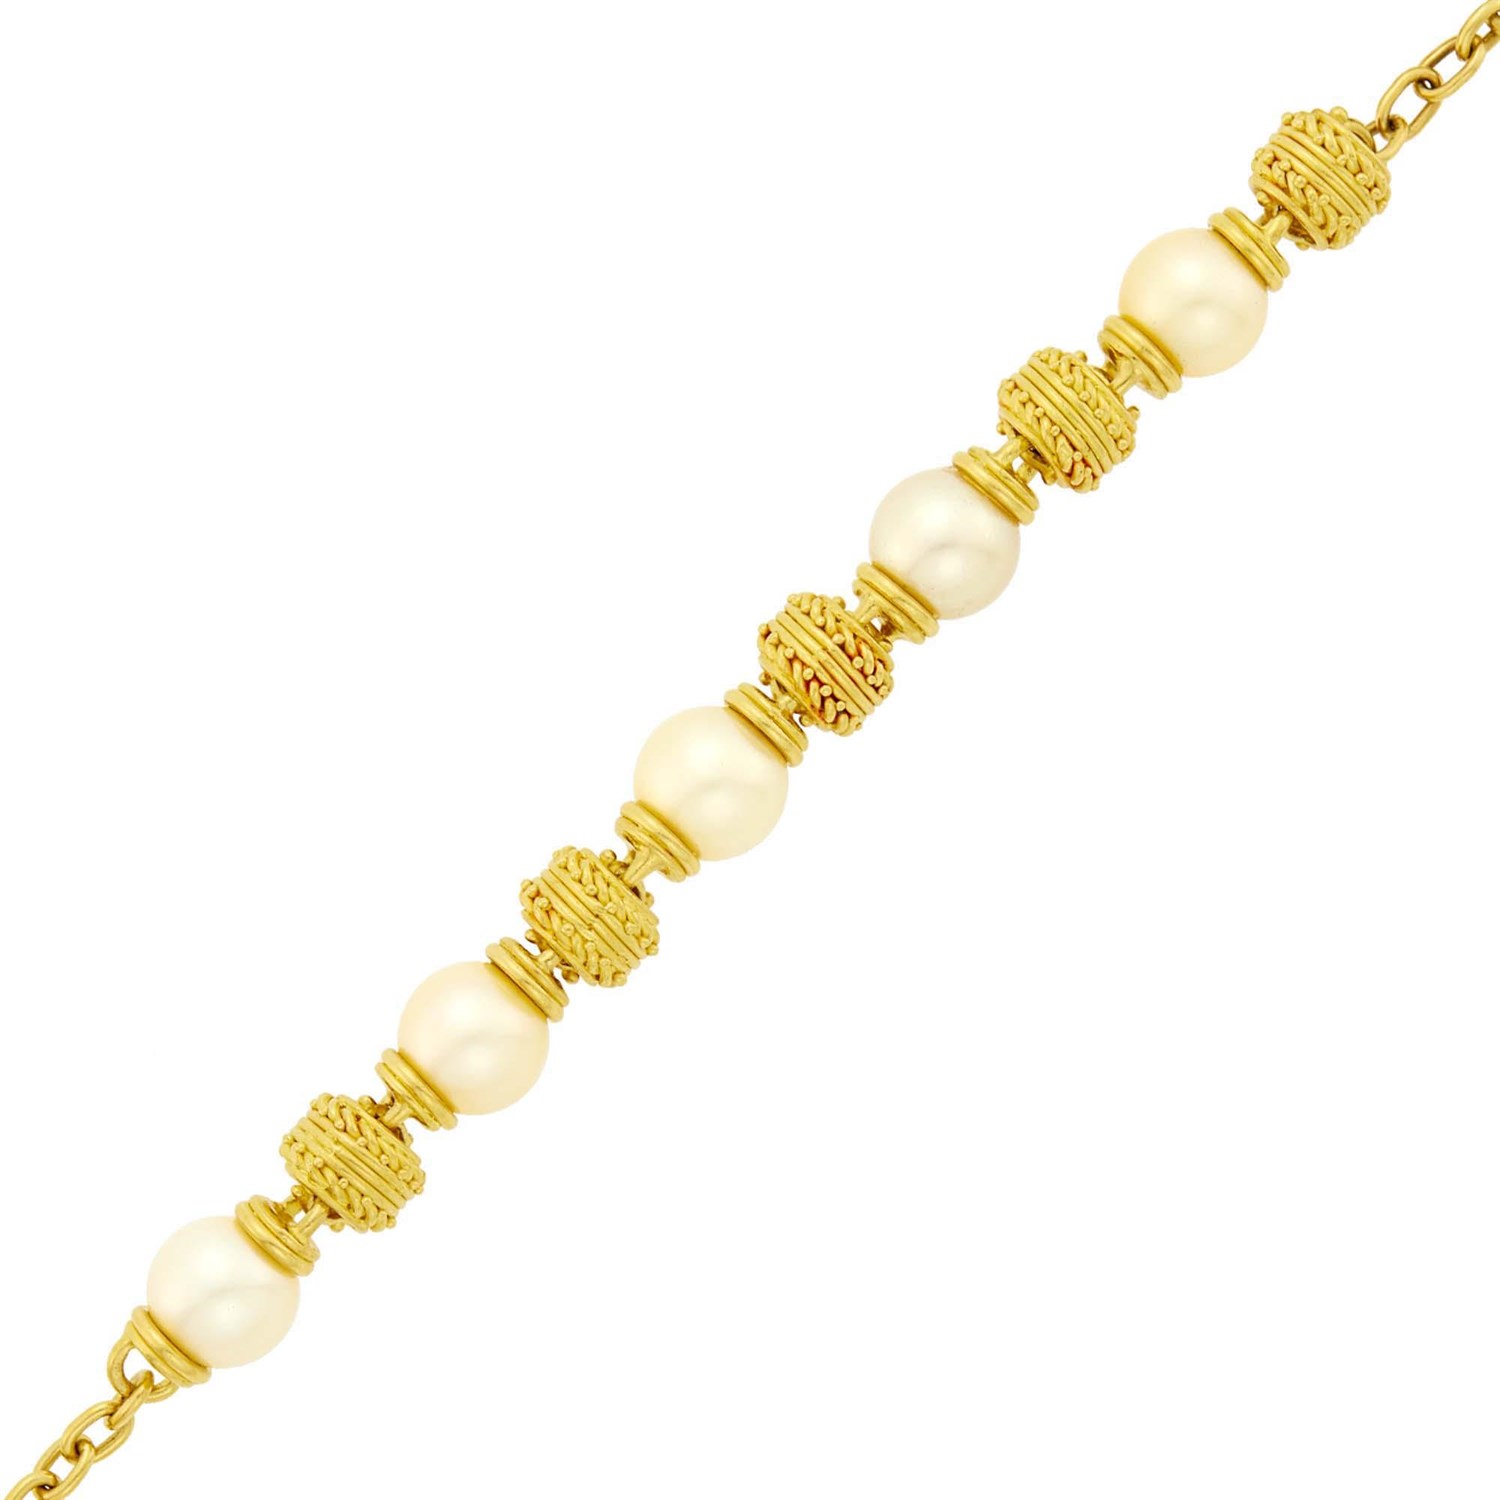 Lot 98 - Denise Roberge High Karat Gold and Golden Cultured Pearl Bracelet with Toggle Clasp